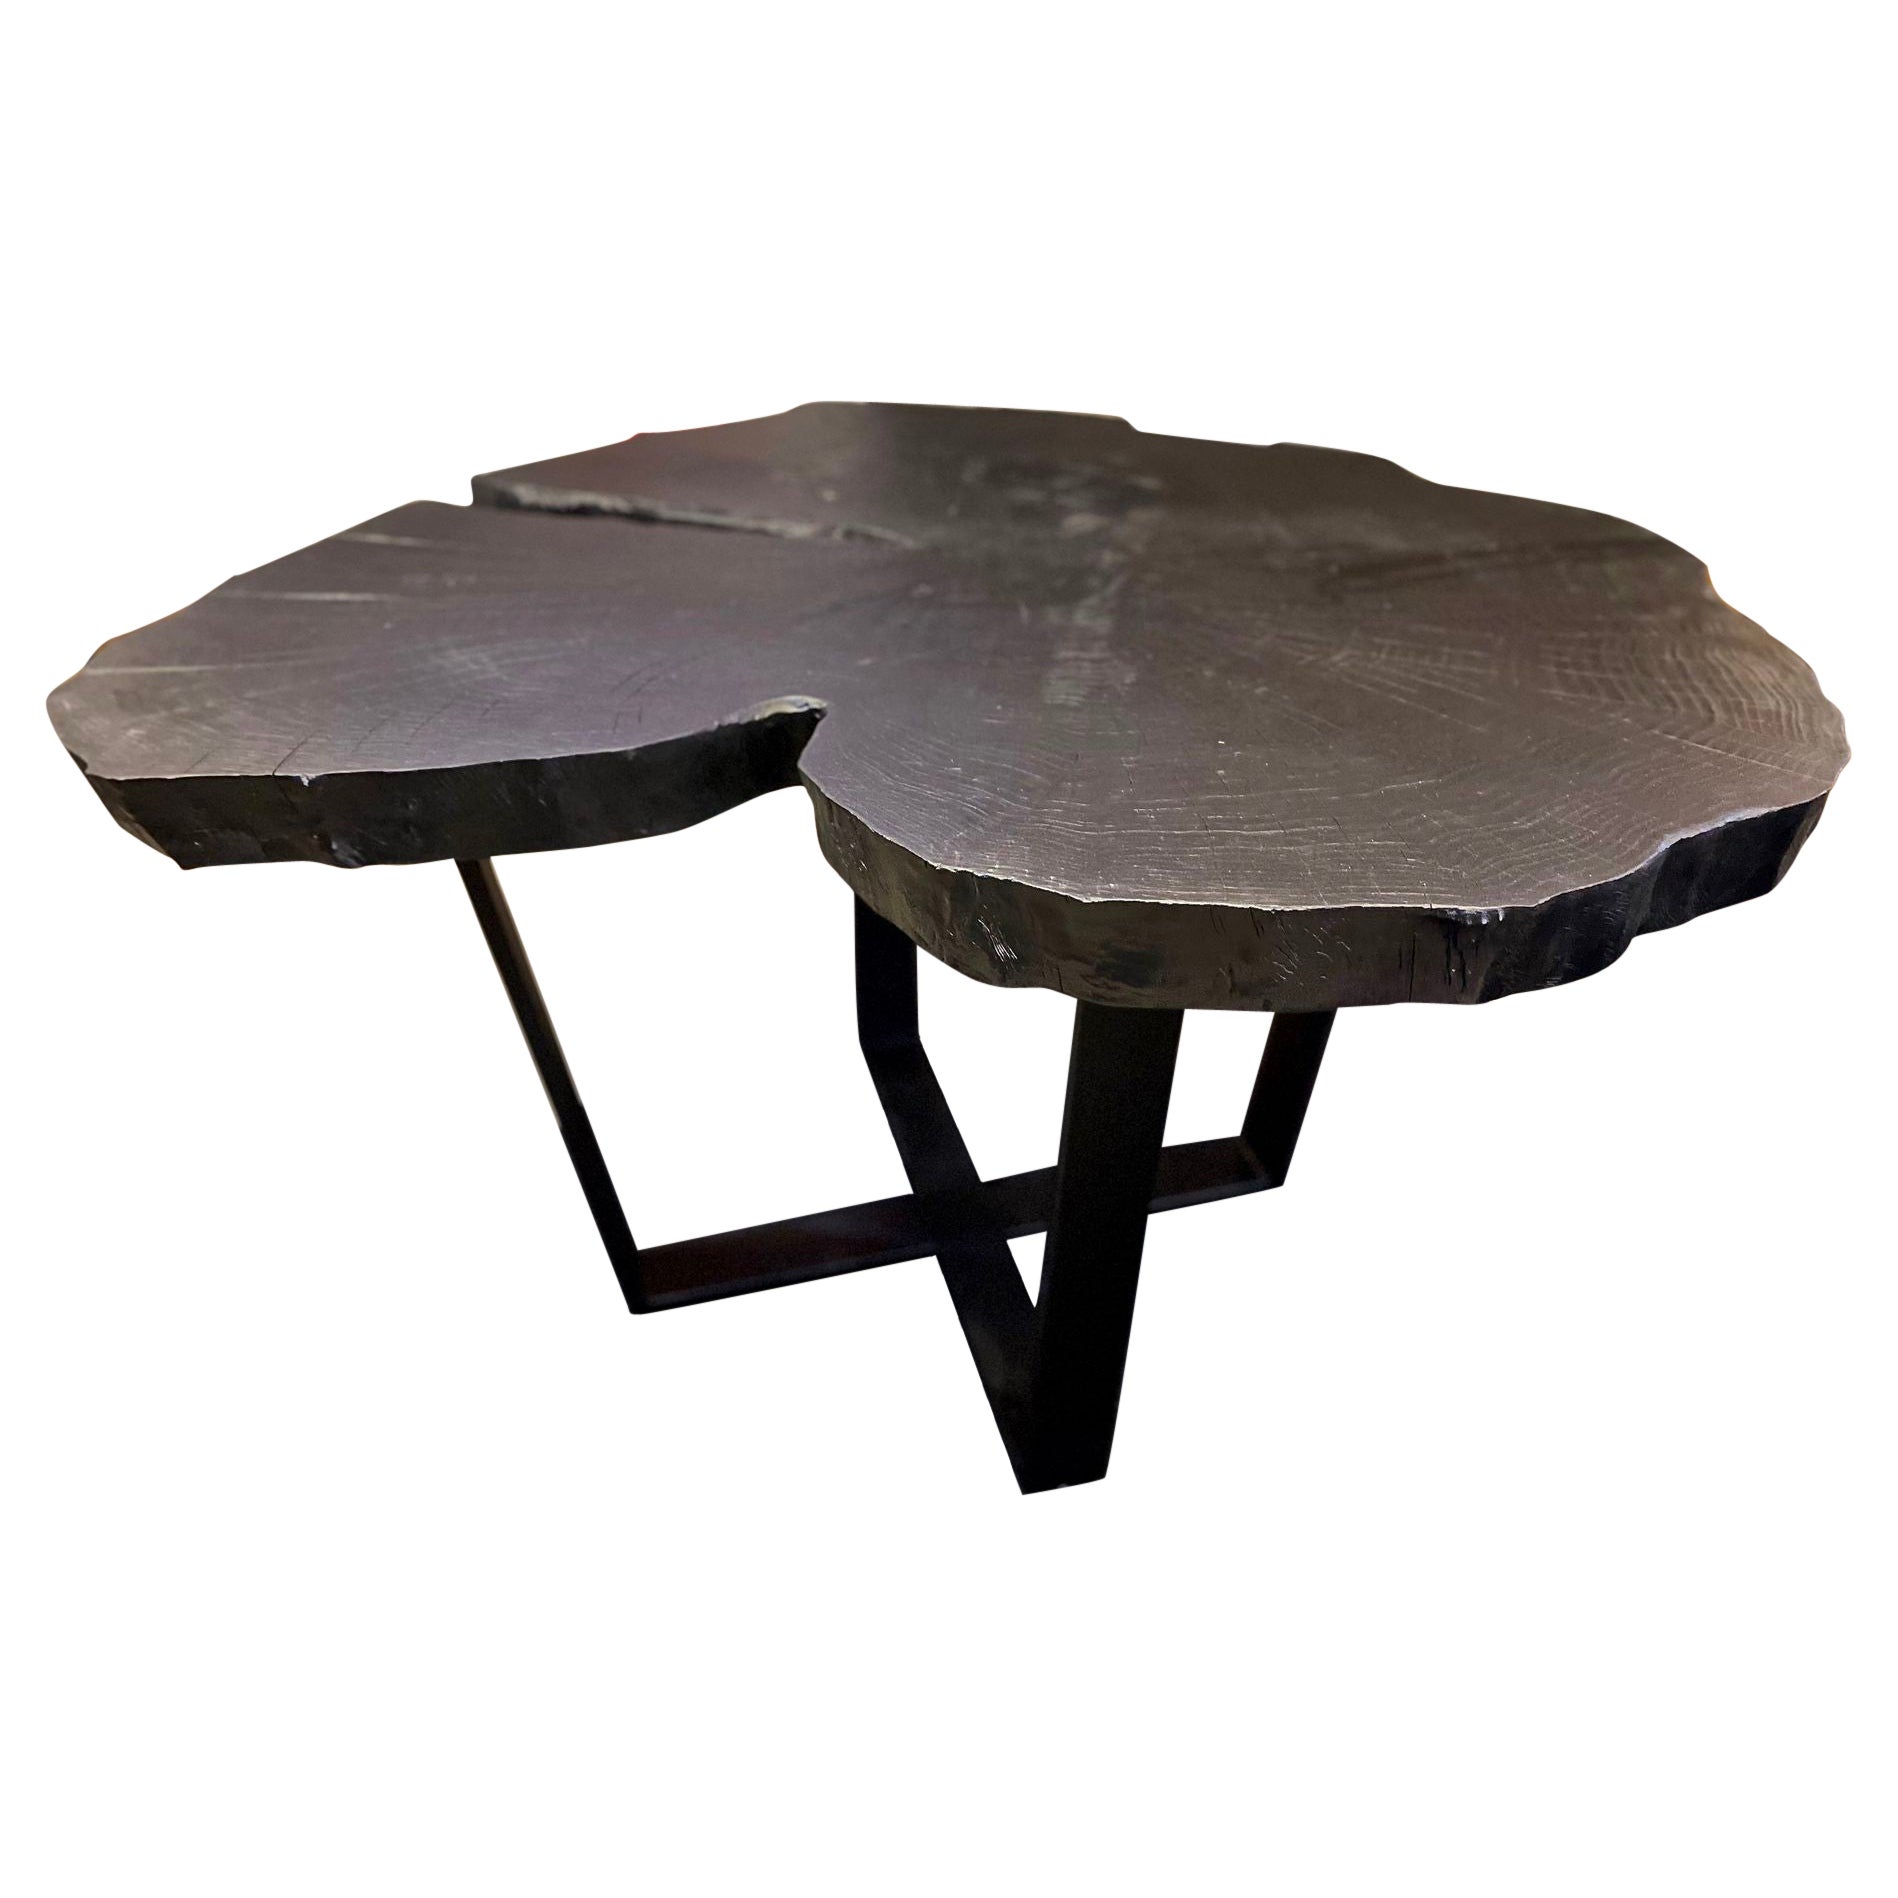 Contemporary Charred Oak Wood Dining Table With Black Steel Base, AT 2024